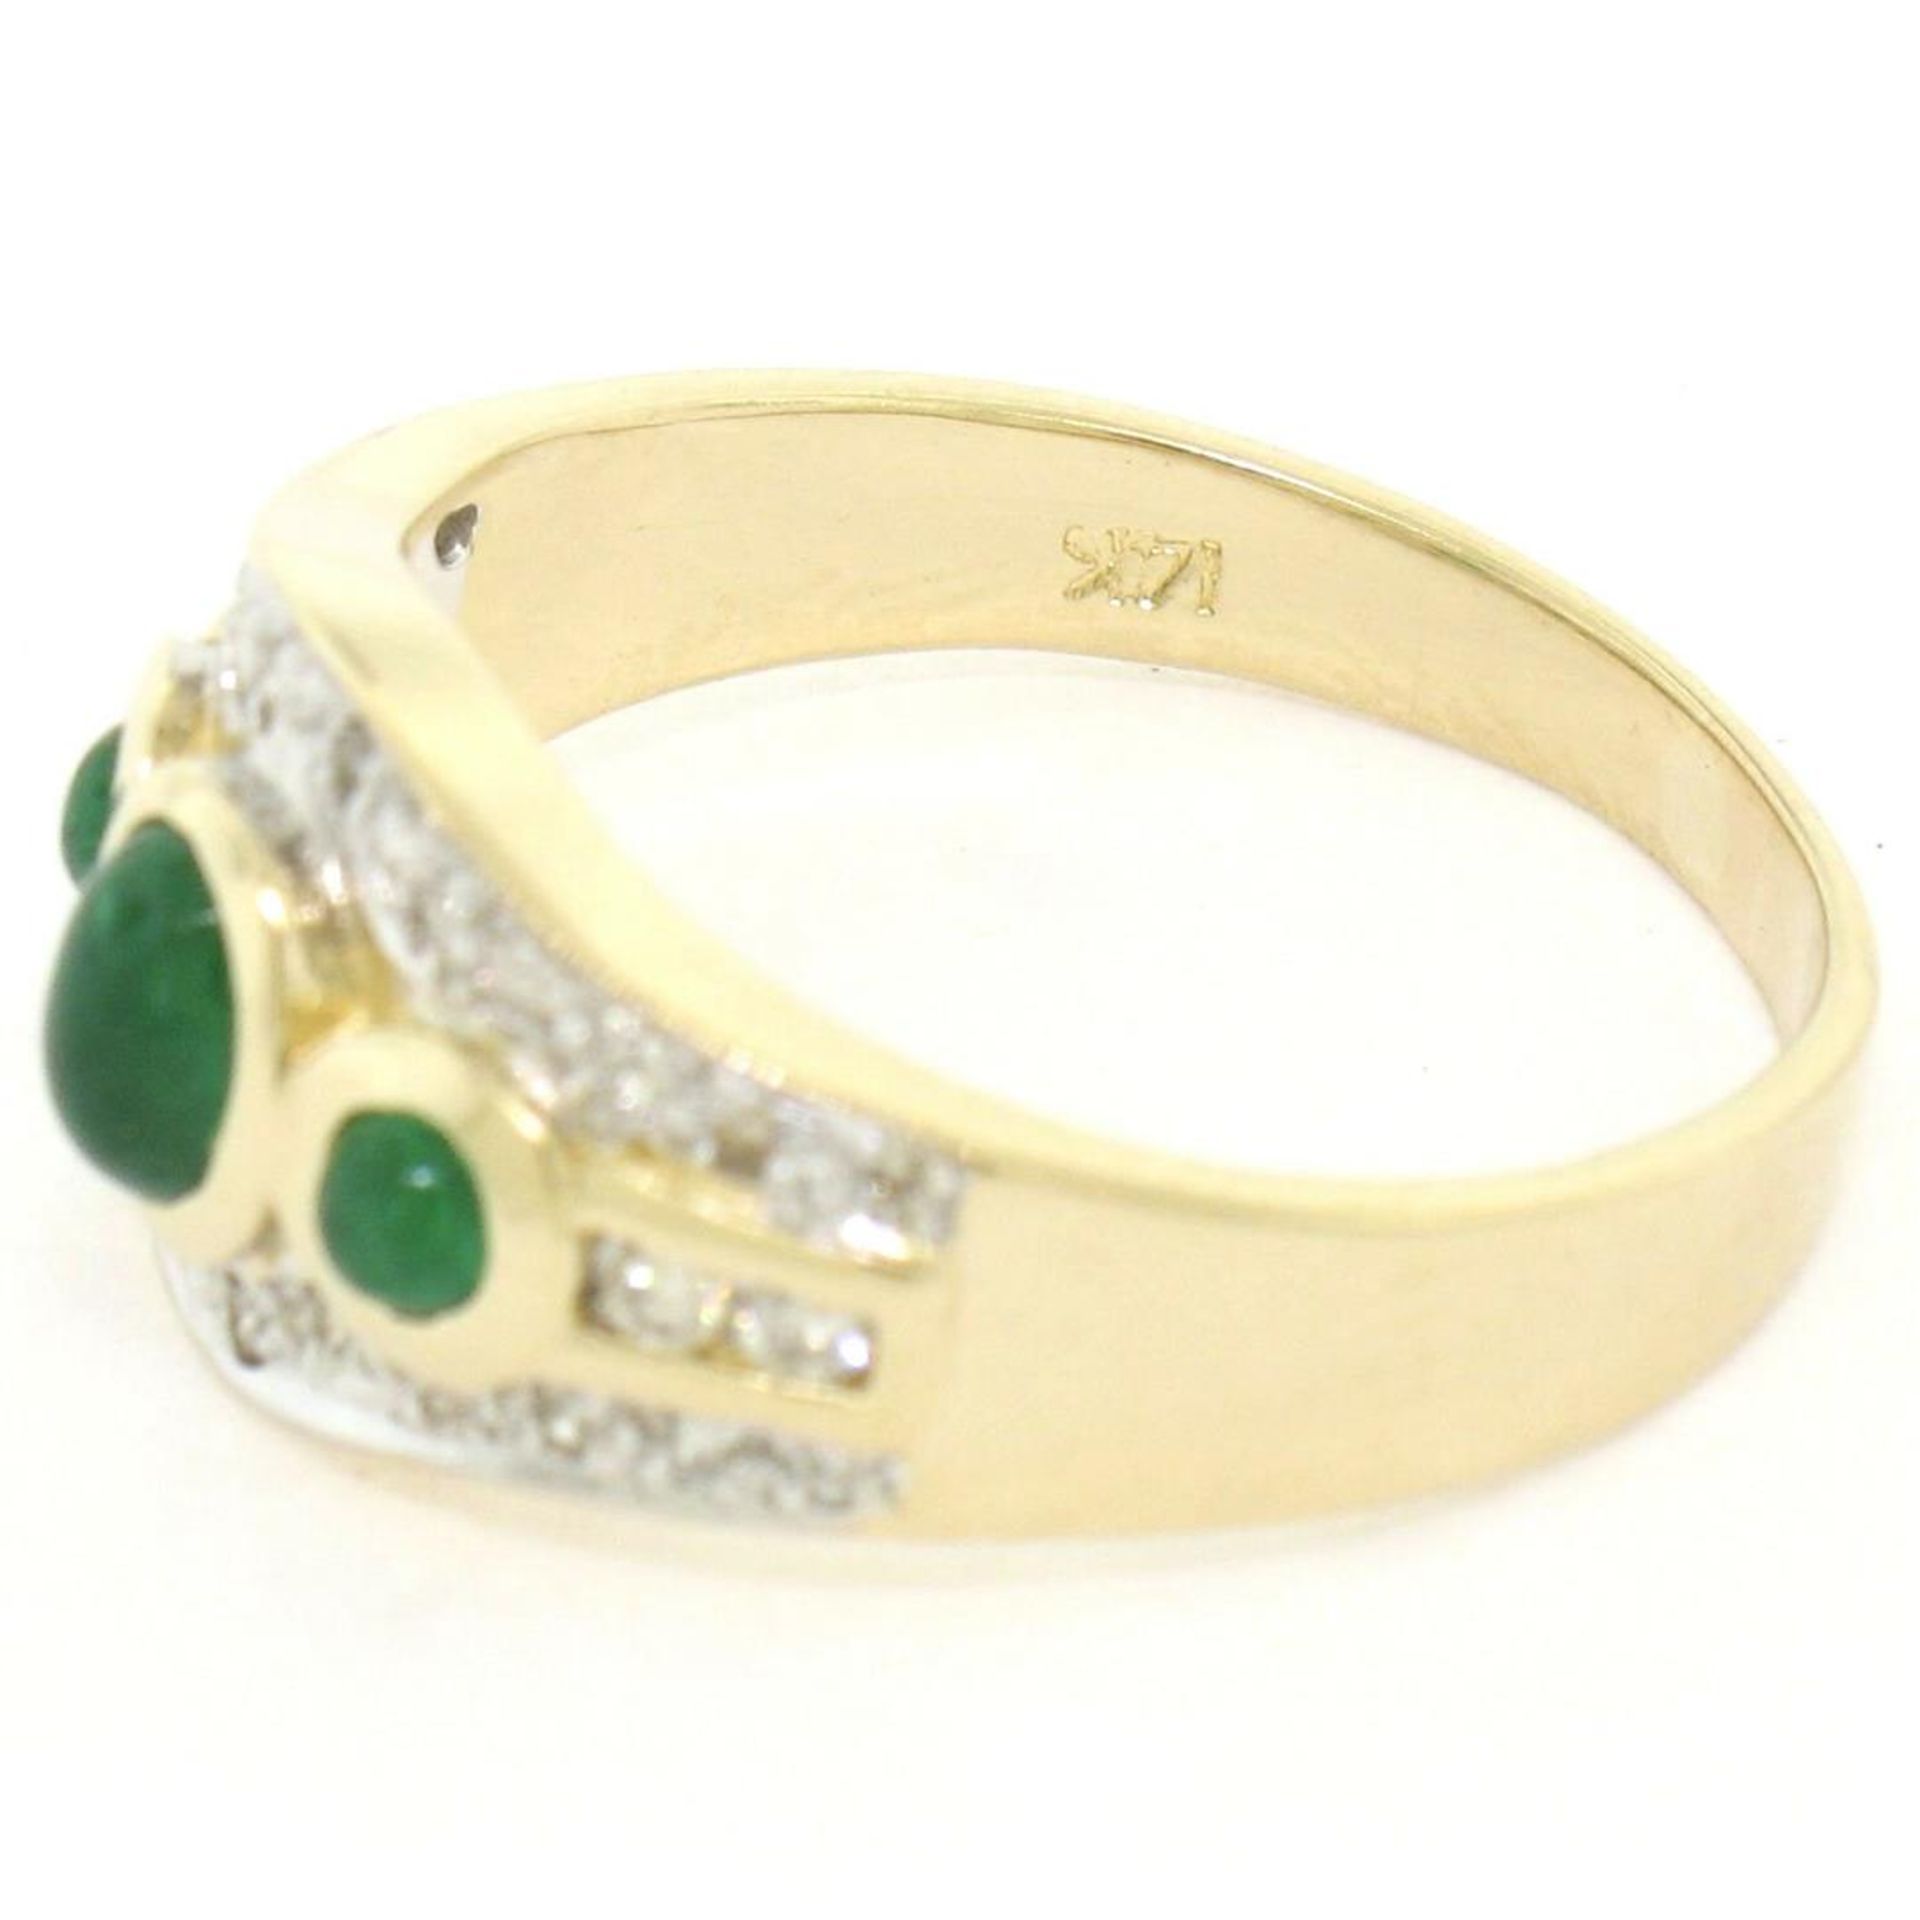 Petite 14K TT Gold 0.68 ctw 3 Cabochon Emerald & Diamond Accented Cocktail Ring - Image 9 of 9